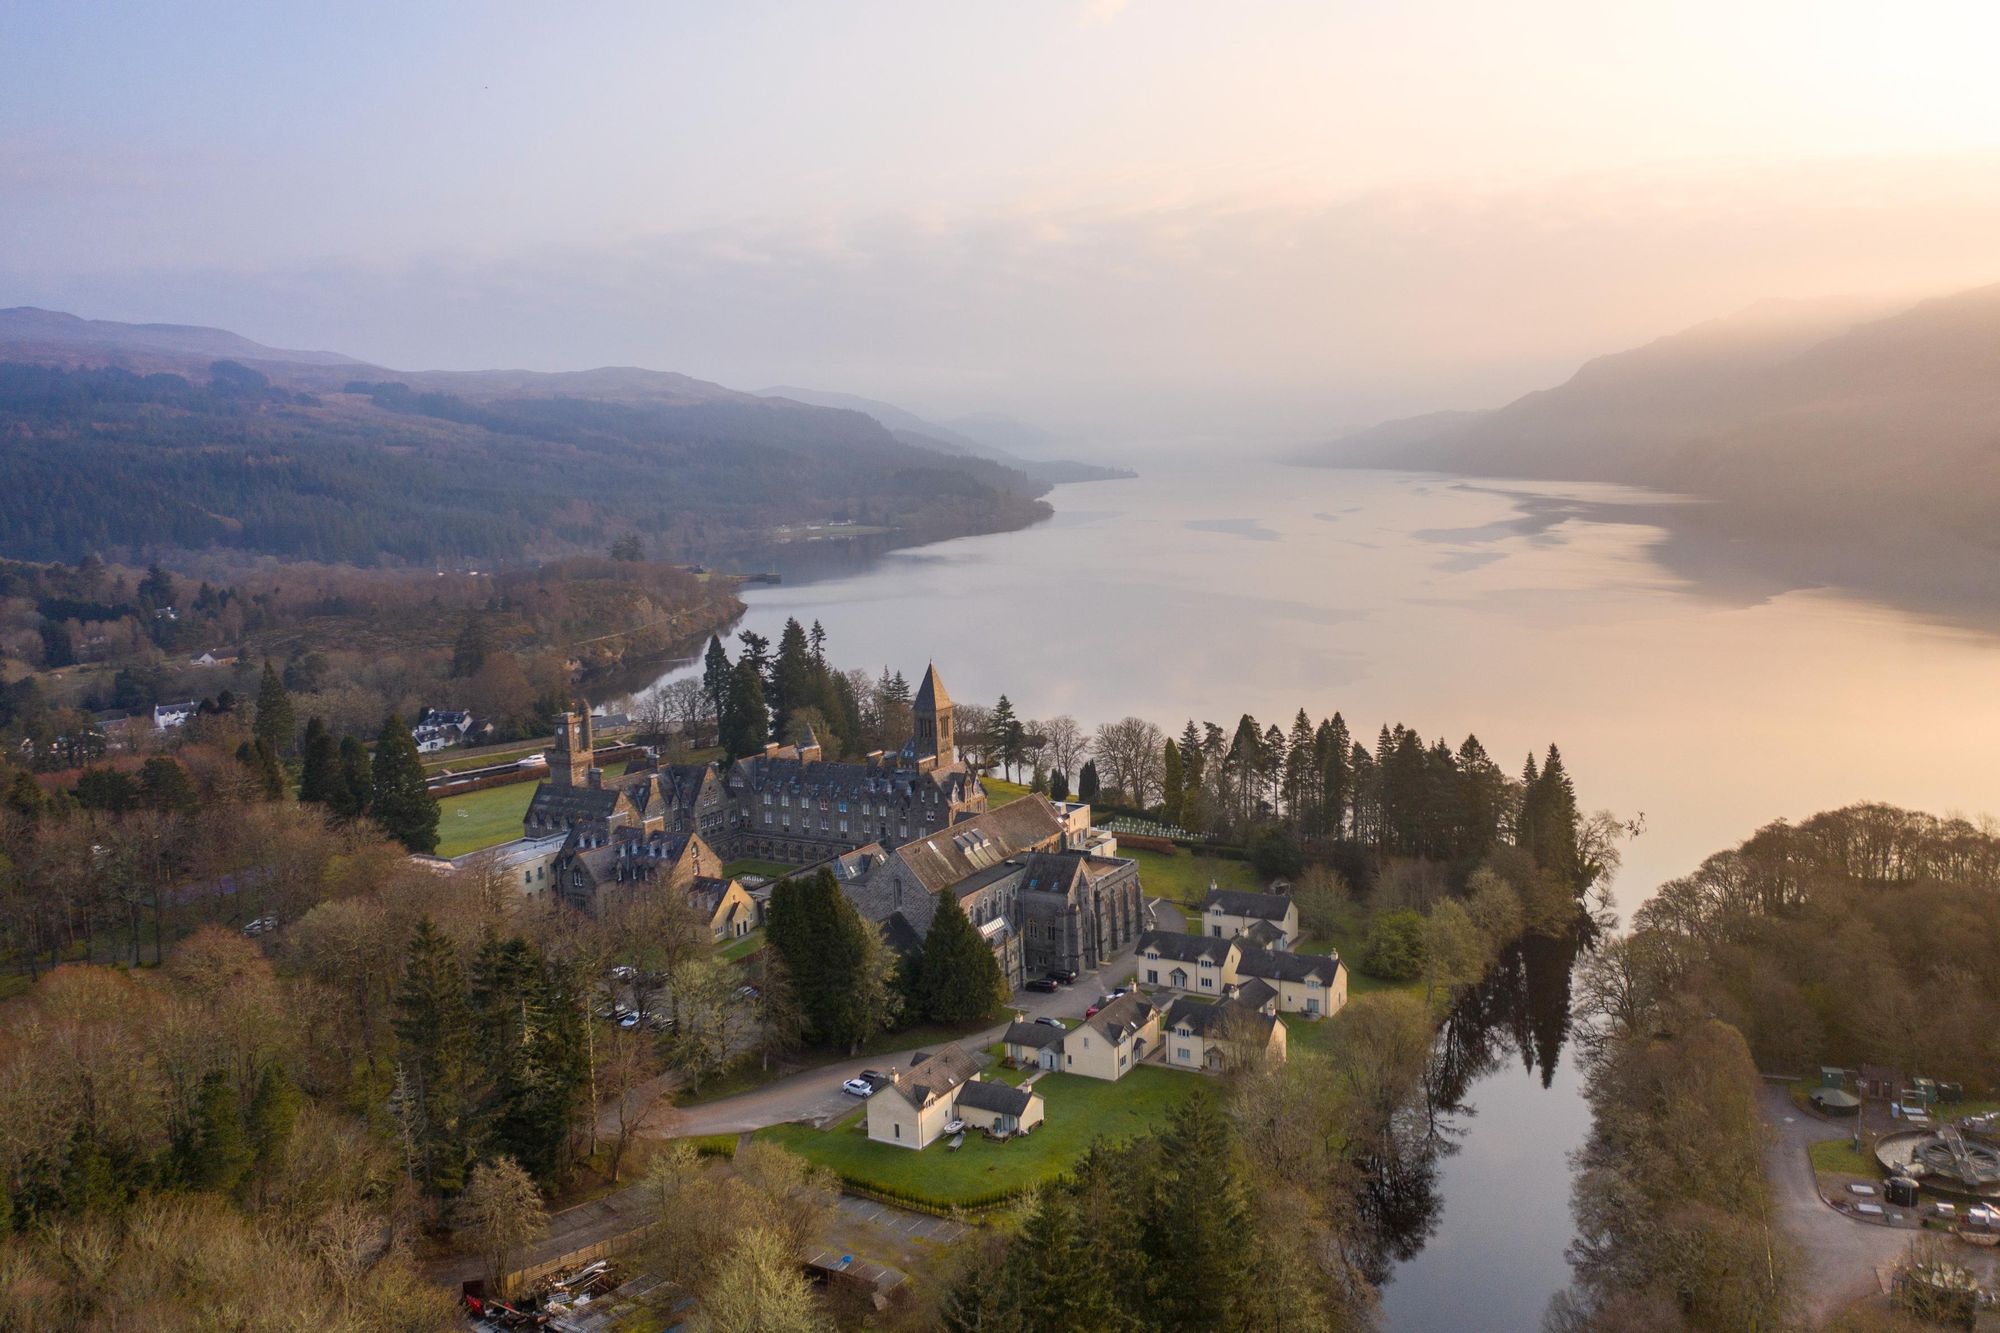 The mighty Loch Ness is 230m, making it the second deepest loch in Scotland behind only Loch Morar. Photo: Getty